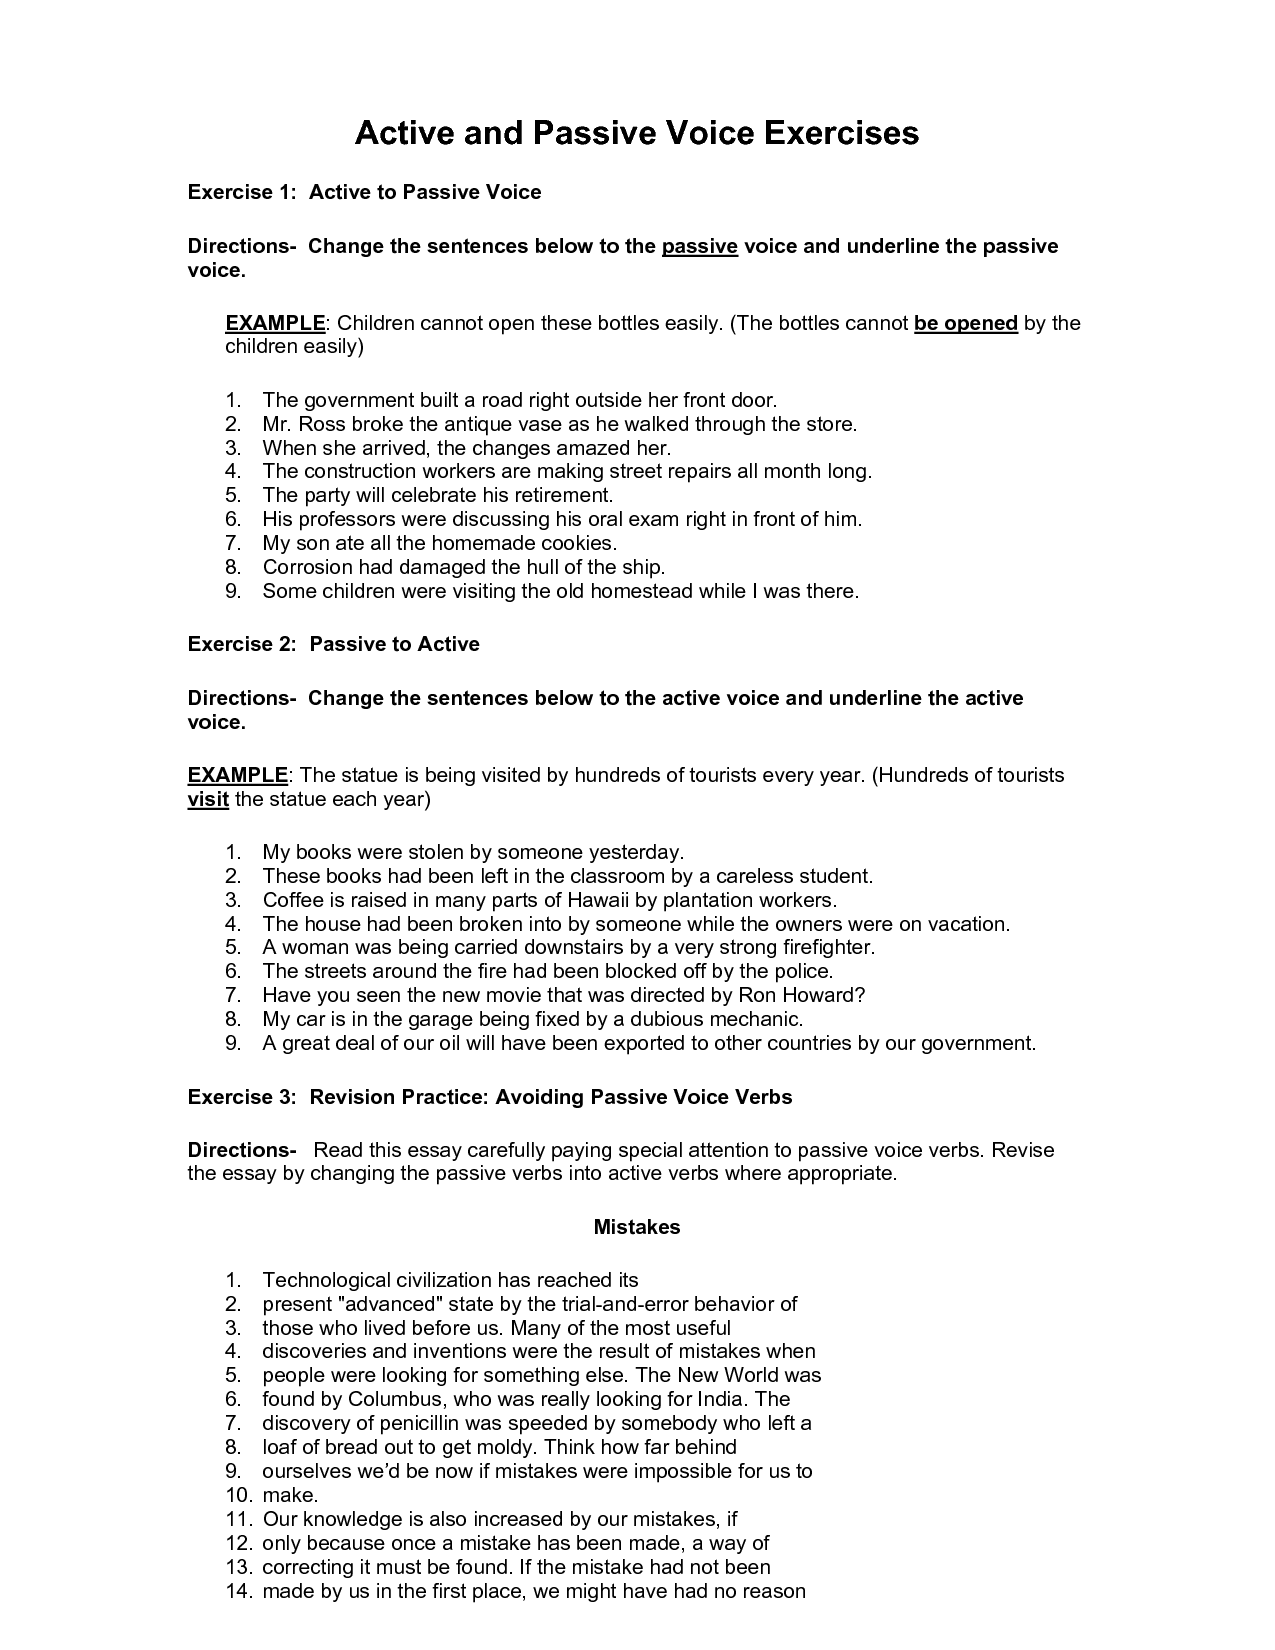 all-tenses-active-passive-voice-interactive-worksheet-active-and-passive-voice-all